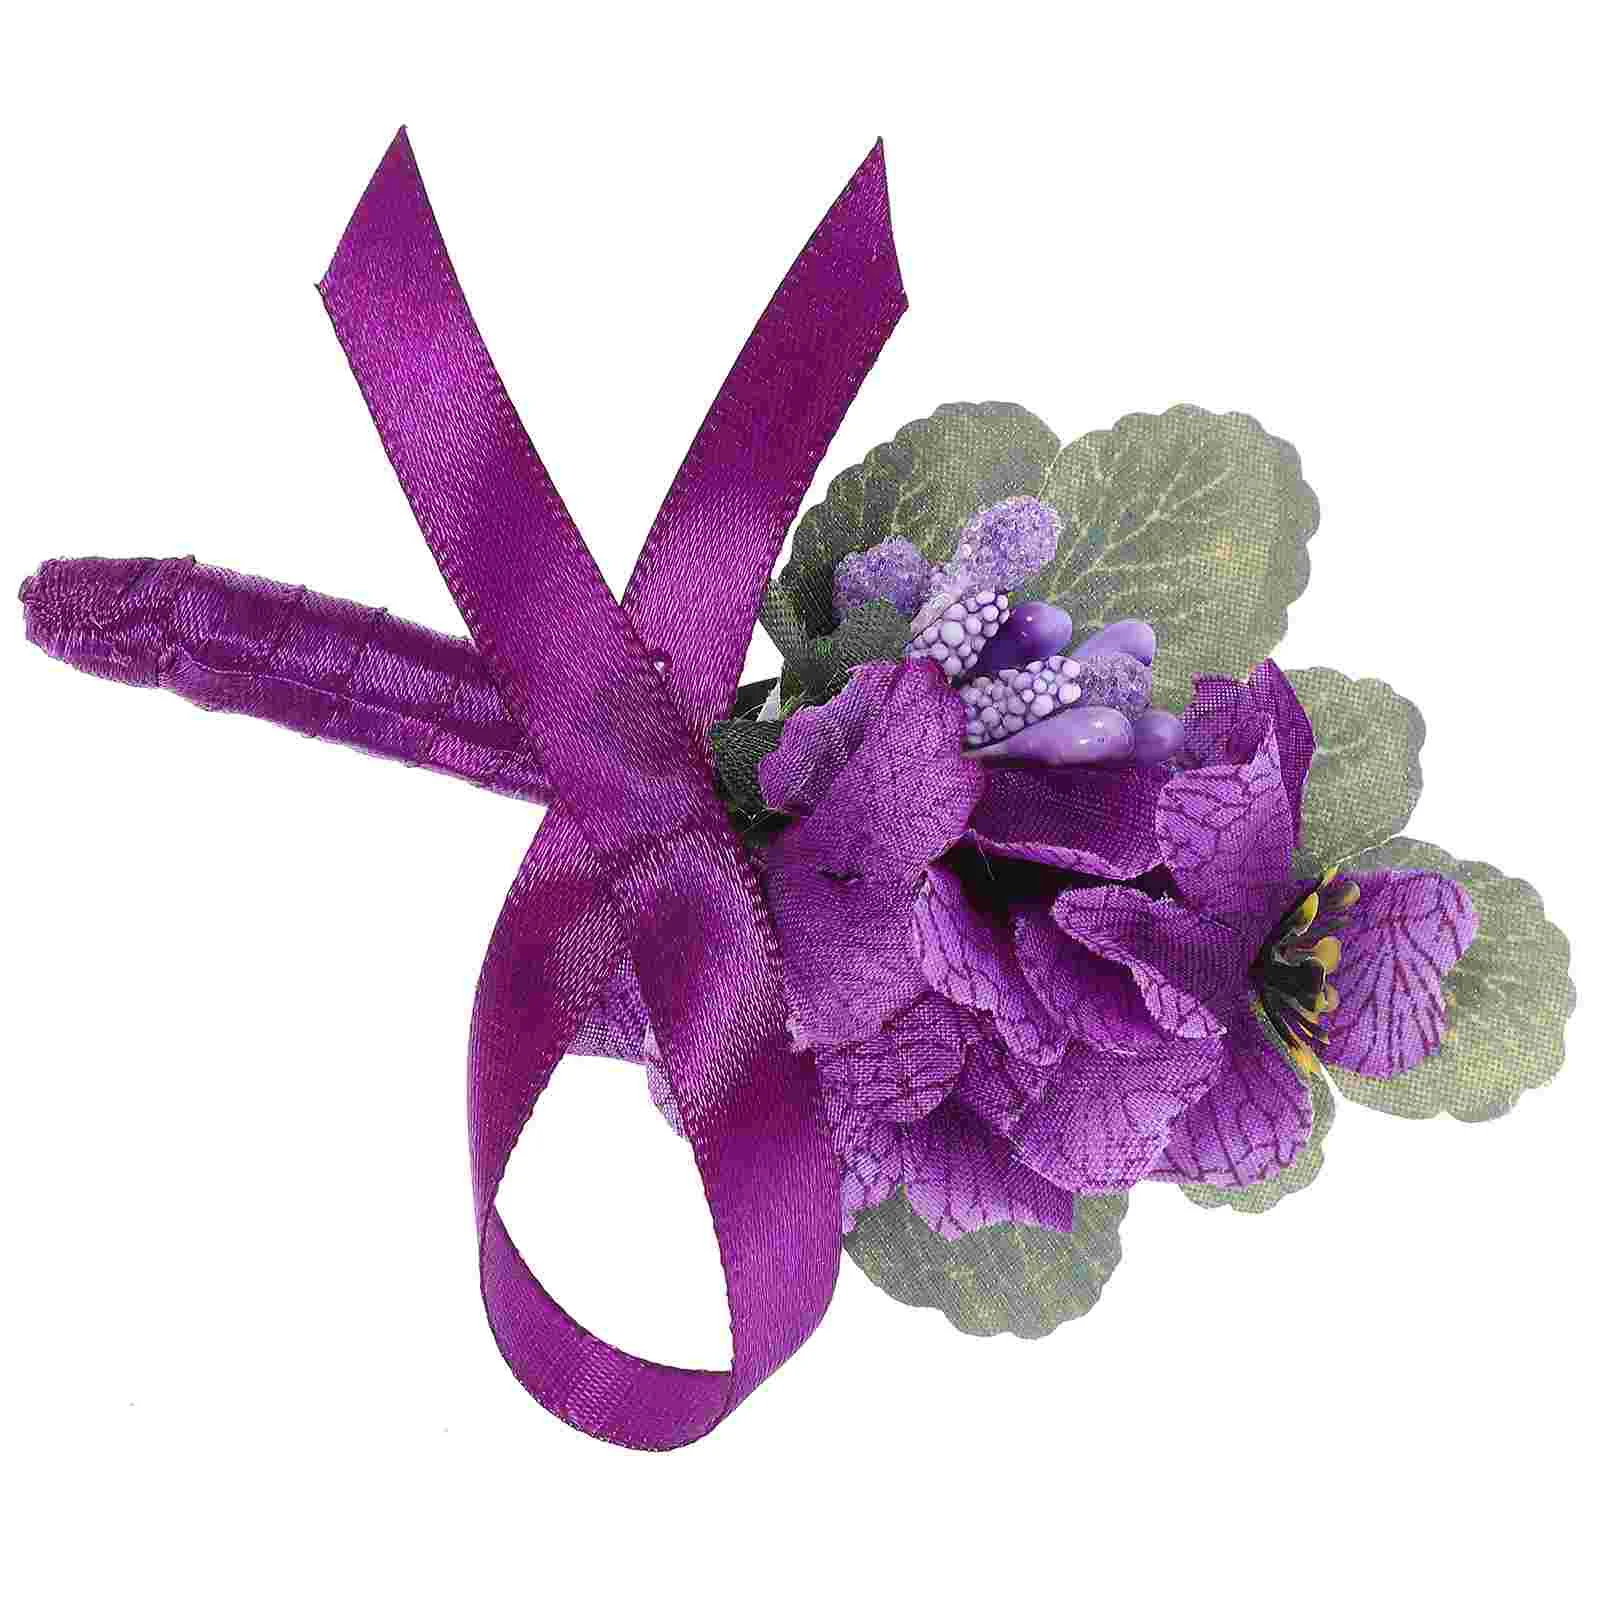 Men's Corsage Flower Lapel Pin Violets Groom Boutonniere for Wedding Gift Brooch Suit Man qiongfu bird high end brooch elegant fashion coat corsage ornament pin flower bird brooch brooch